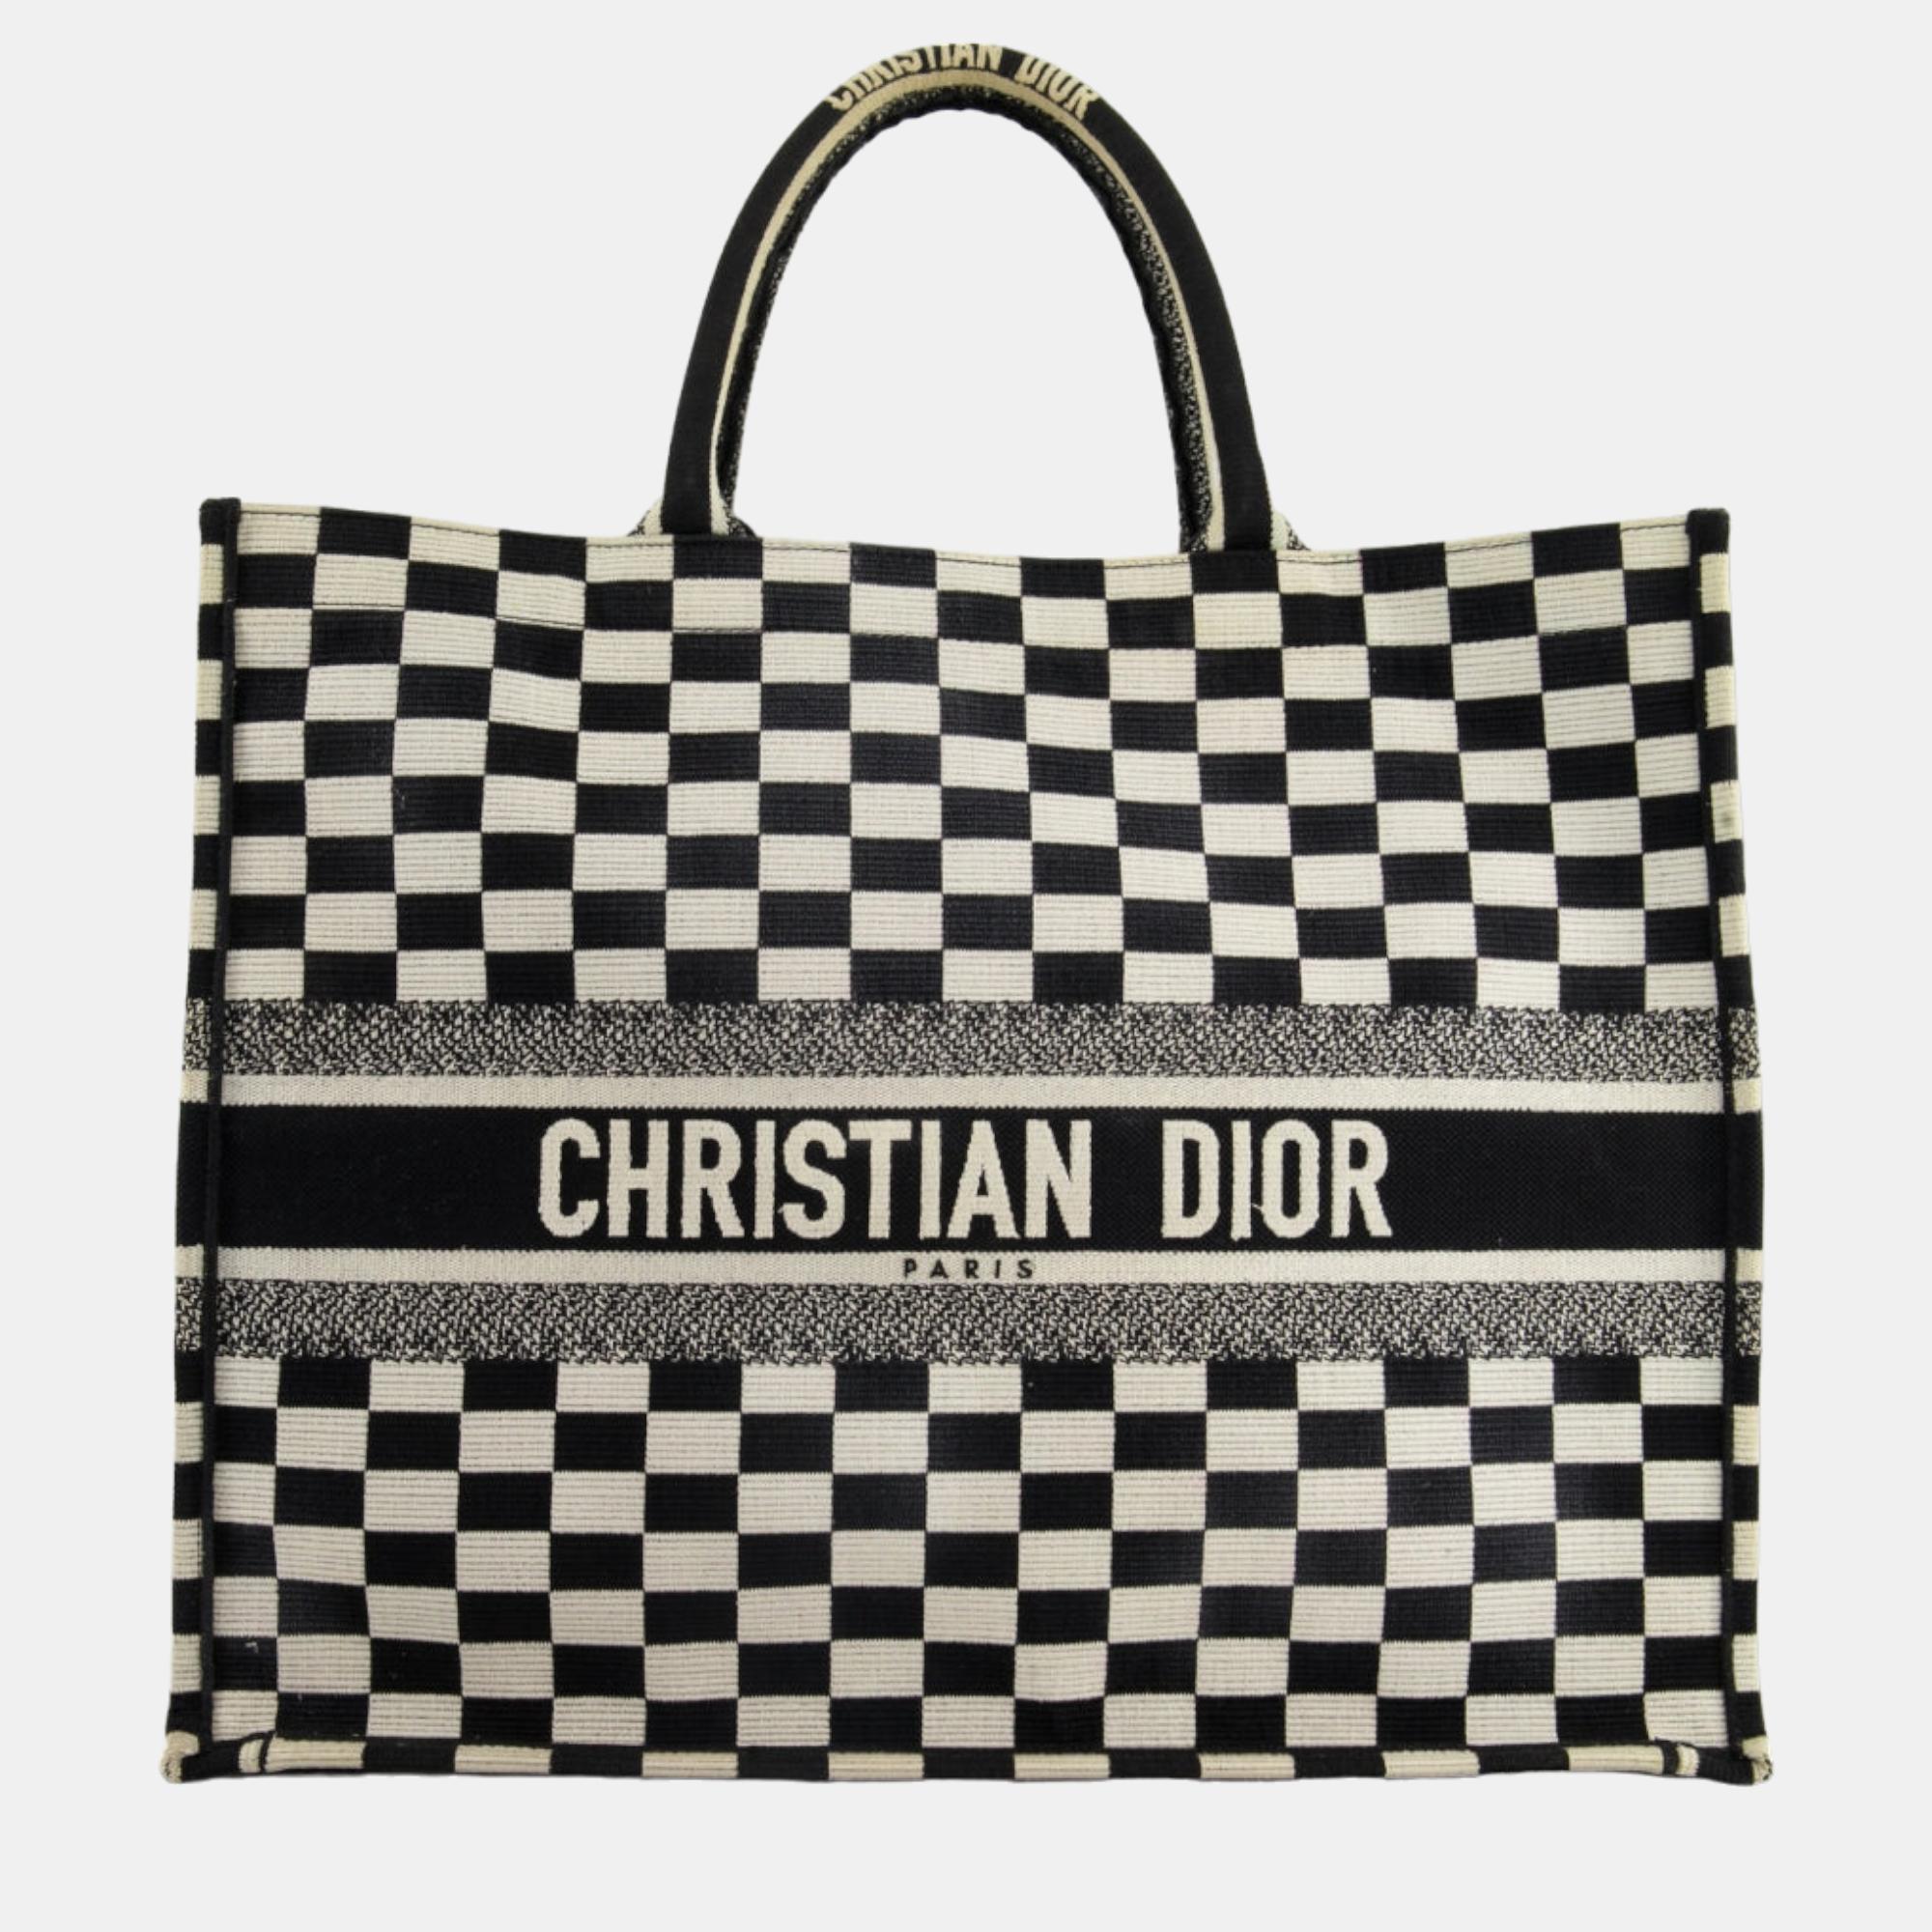 Christian Dior Large Black and White Chequered Book Tote Bag